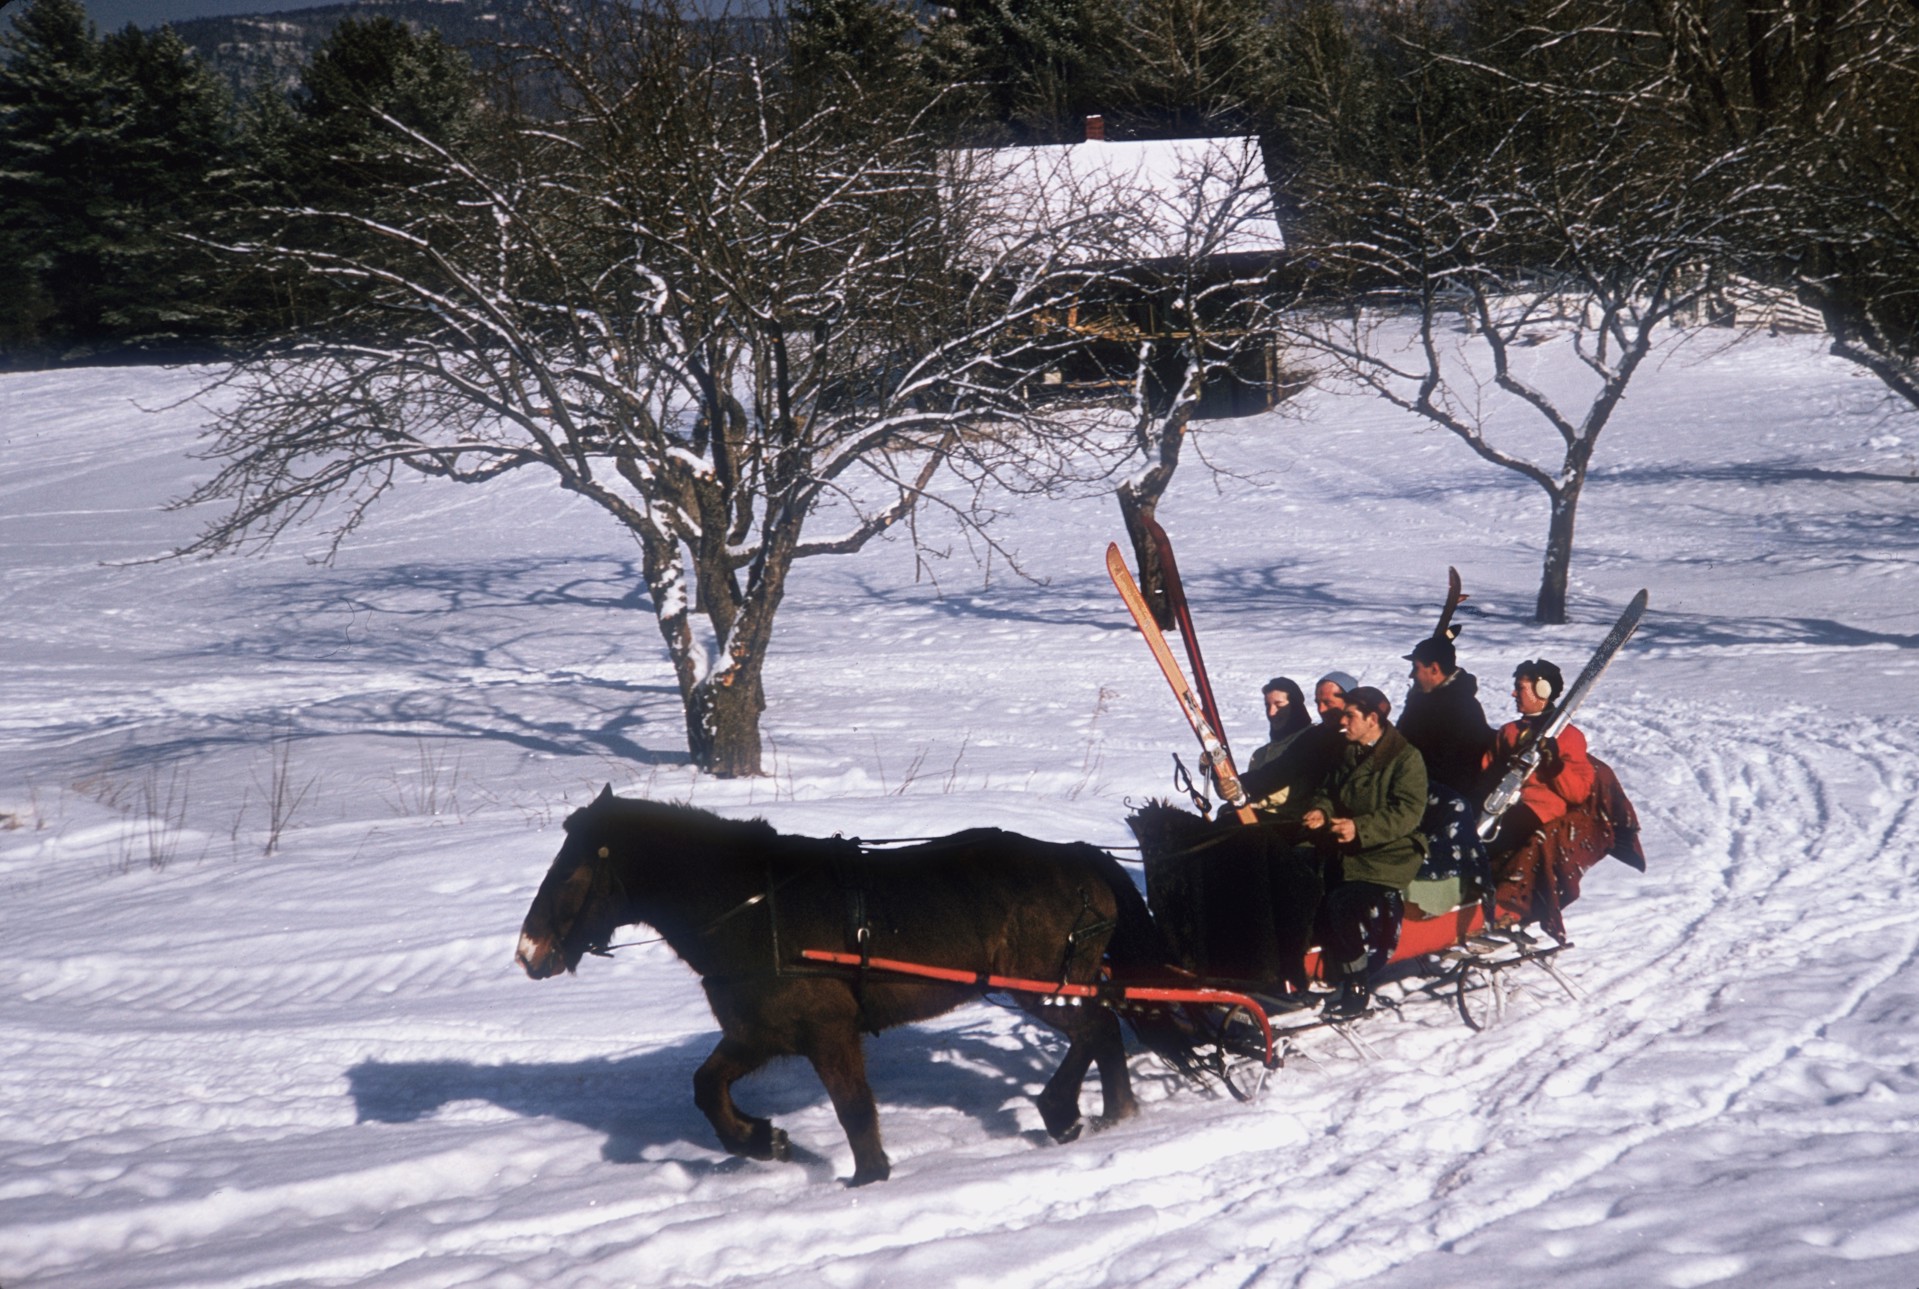 North Conway Sleigh by Slim Aarons